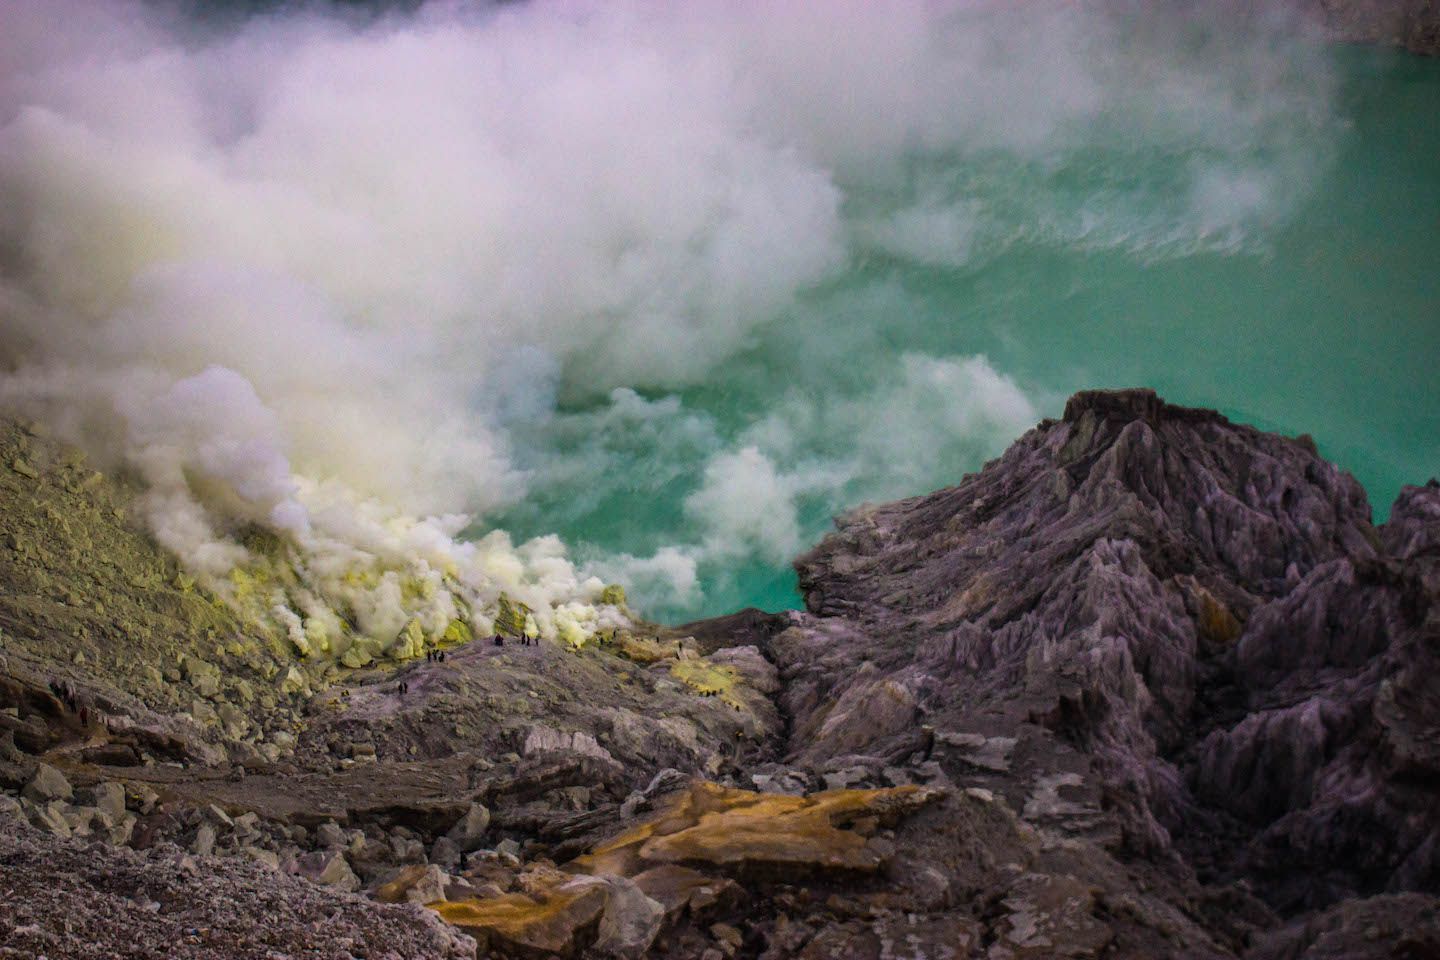 Smoke coming out of the sulfur mine, Mt. Ijen, Indonesia